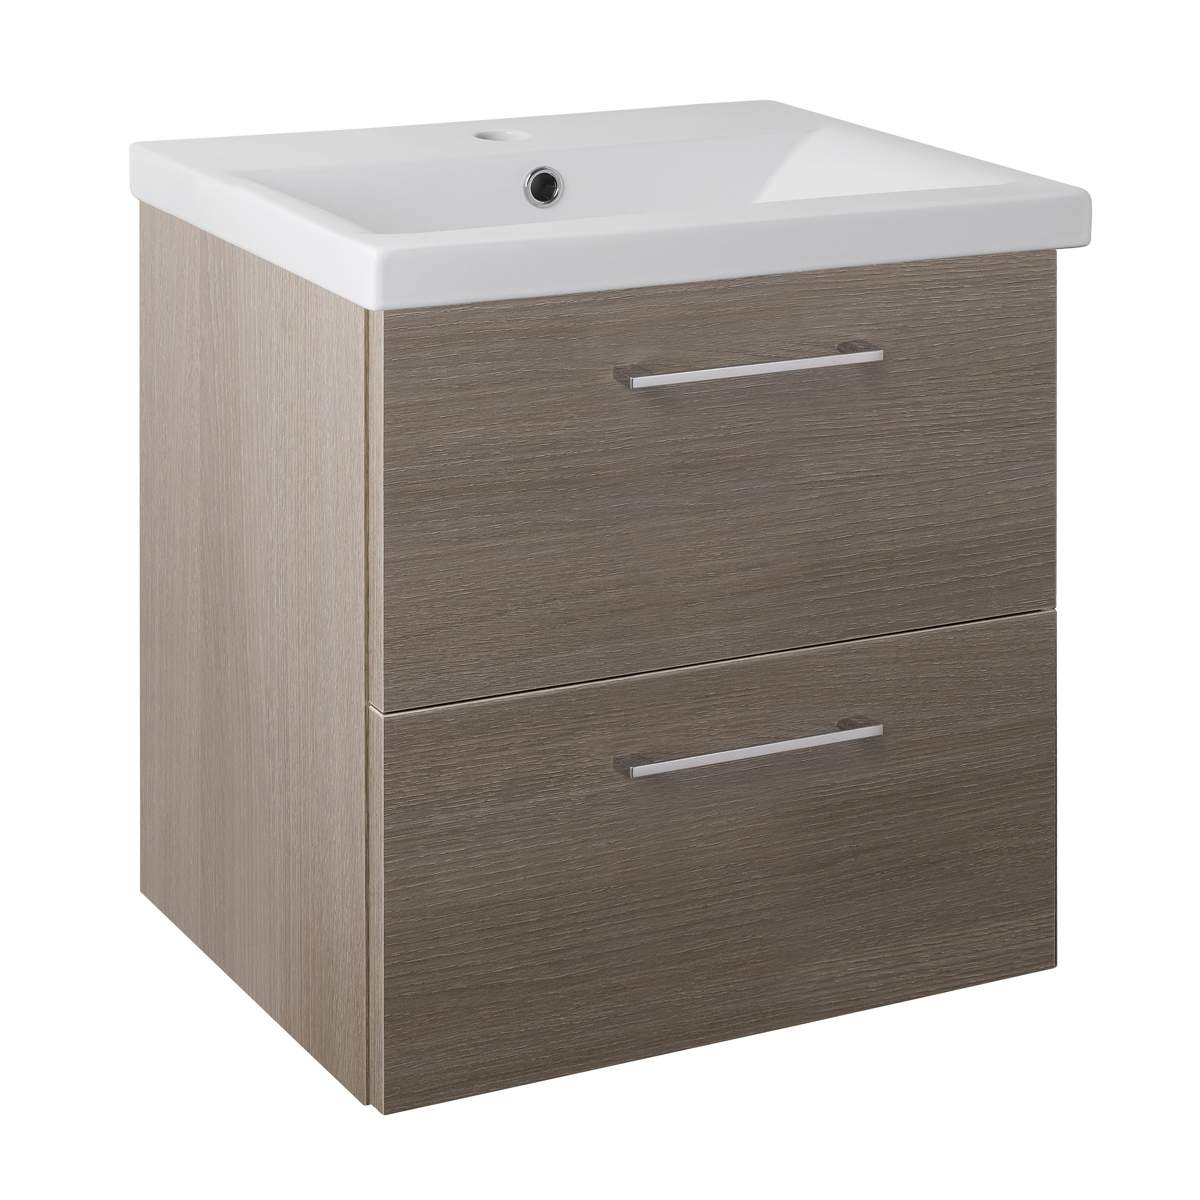 JTP Pace Units 500mm Wall Mounted Unit with Drawers and Basin in Grey (PWM503GR + P500BS)